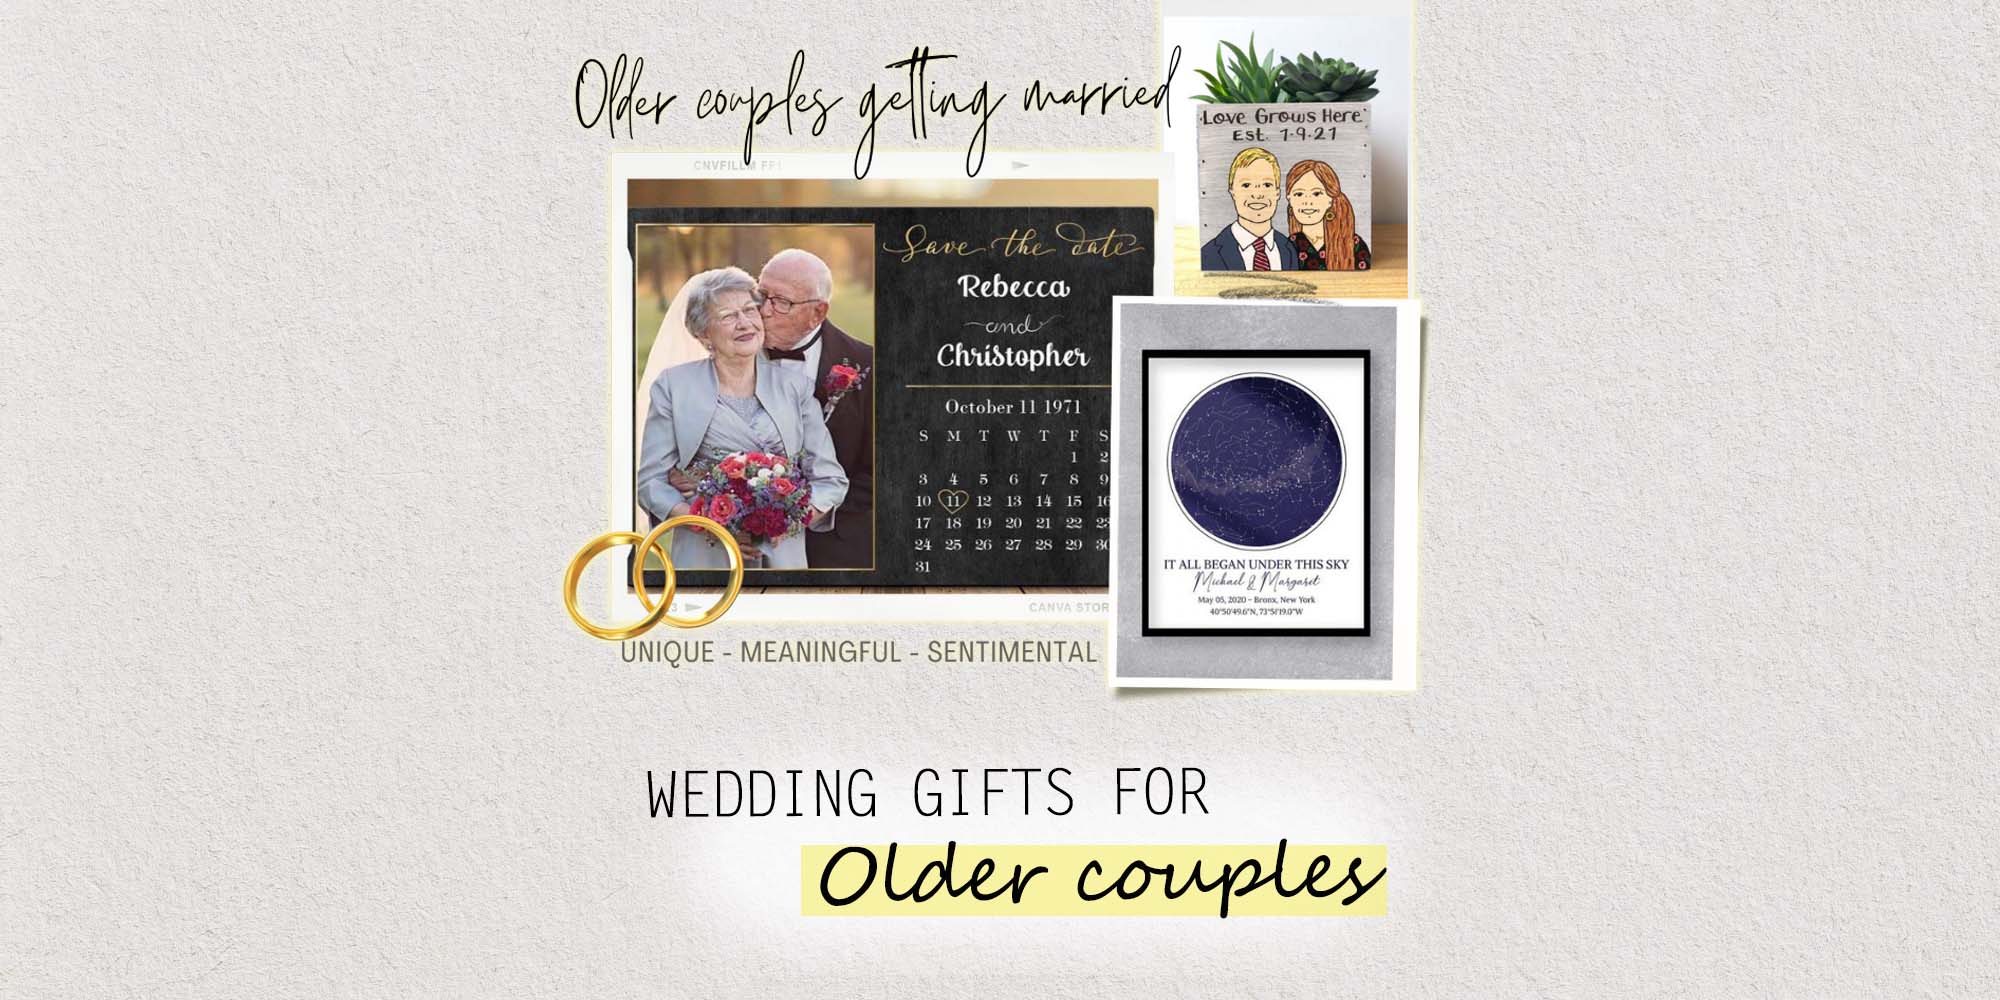 30 Unique Wedding Gift Ideas for Older Couples in 2022